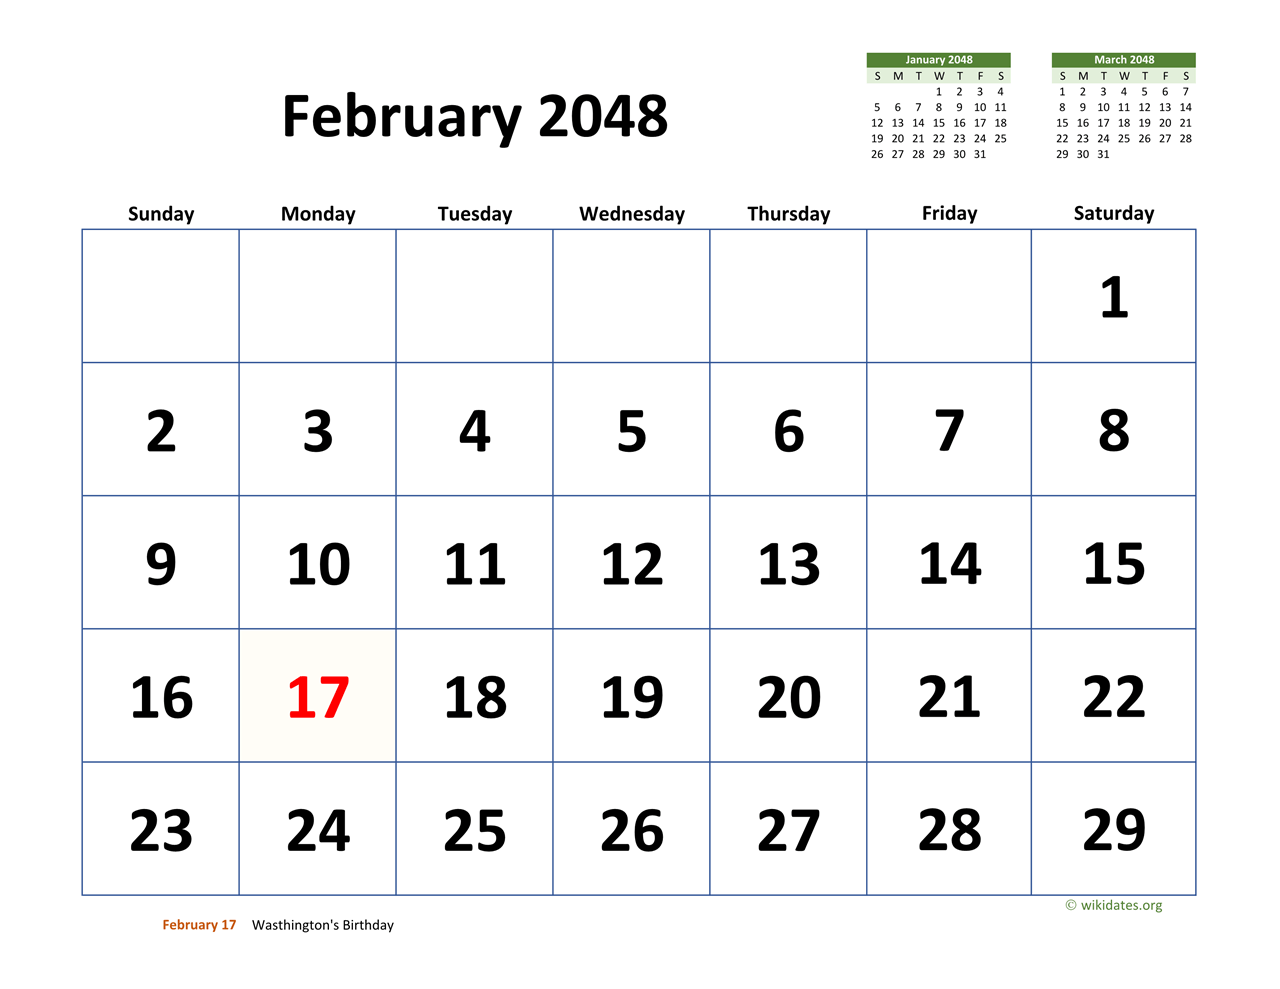 February 2048 Calendar with Extralarge Dates